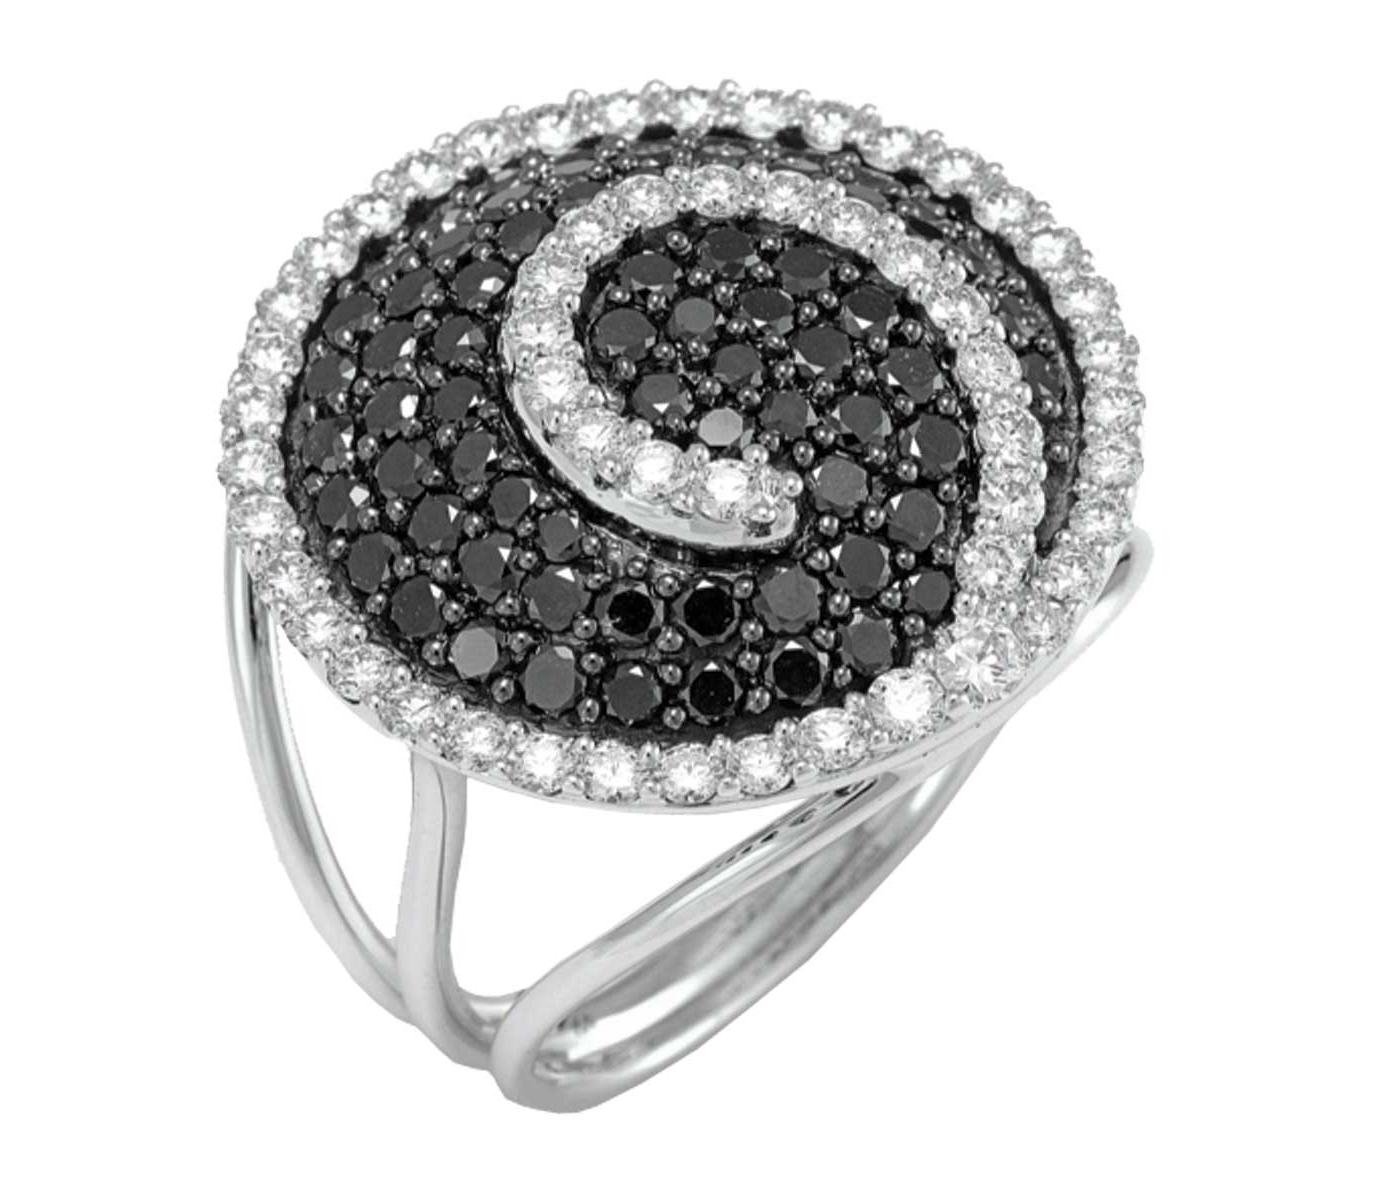 Ring by Facet